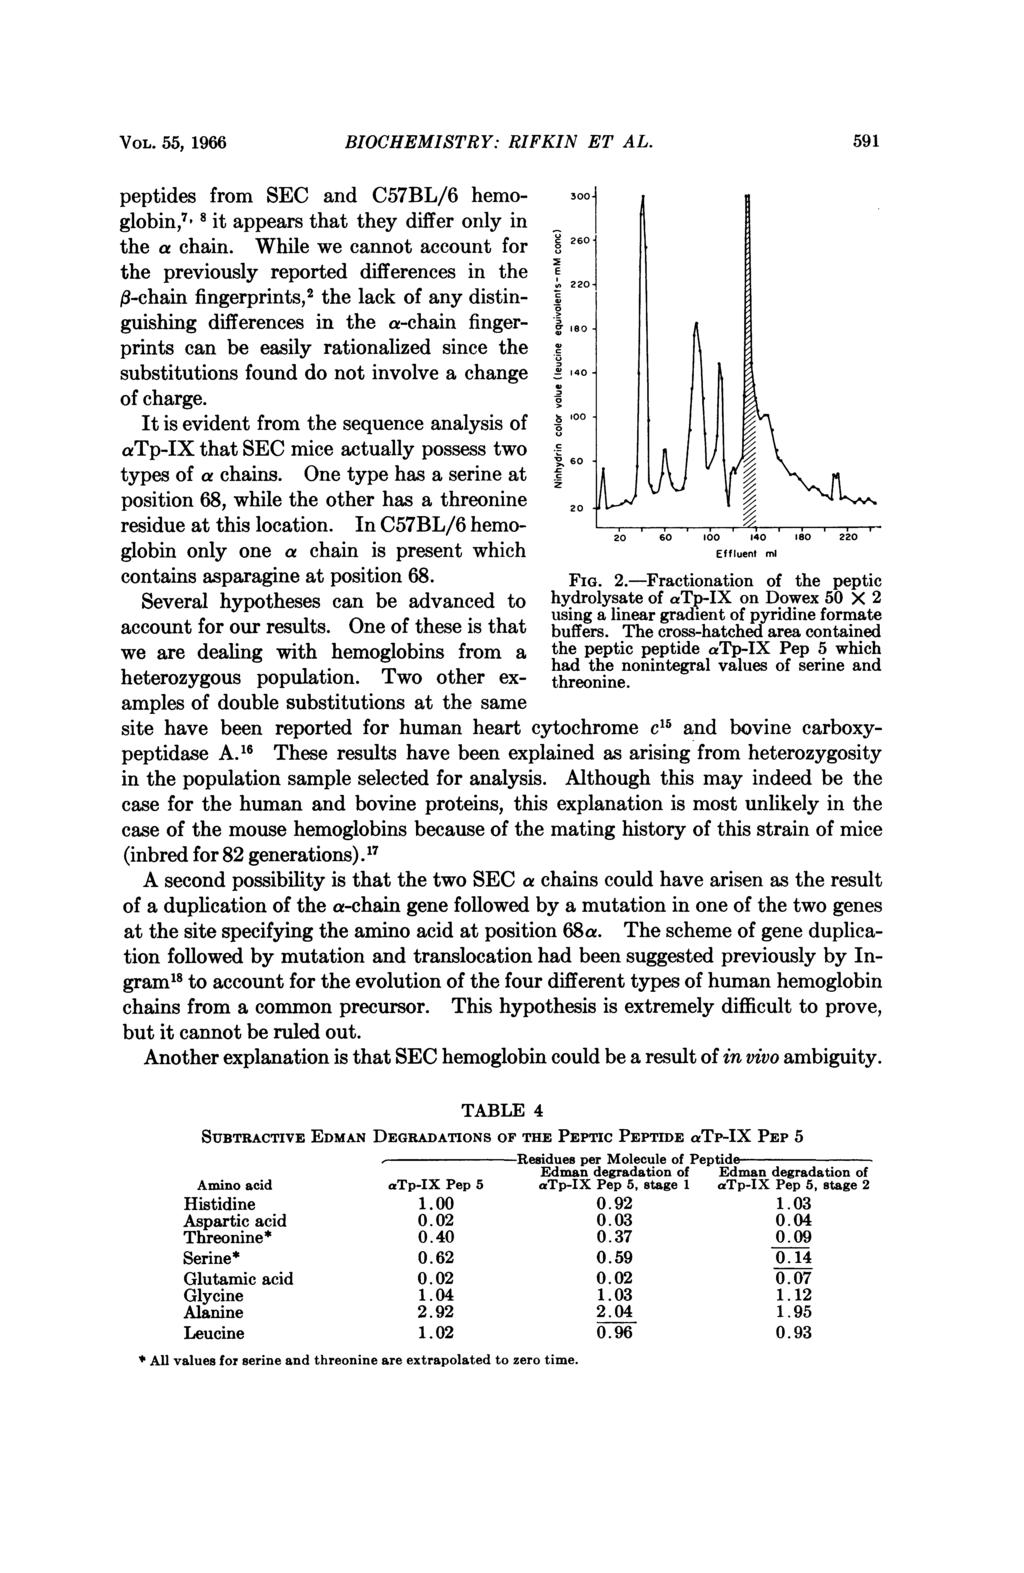 VOL. 55, 1966 BIOCHEMISTRY: RIFKIN ET AL. 591 peptides from SEC and C57BL/6 hemo- 300 globin,7 8 it appears that they differ only in the a chain.